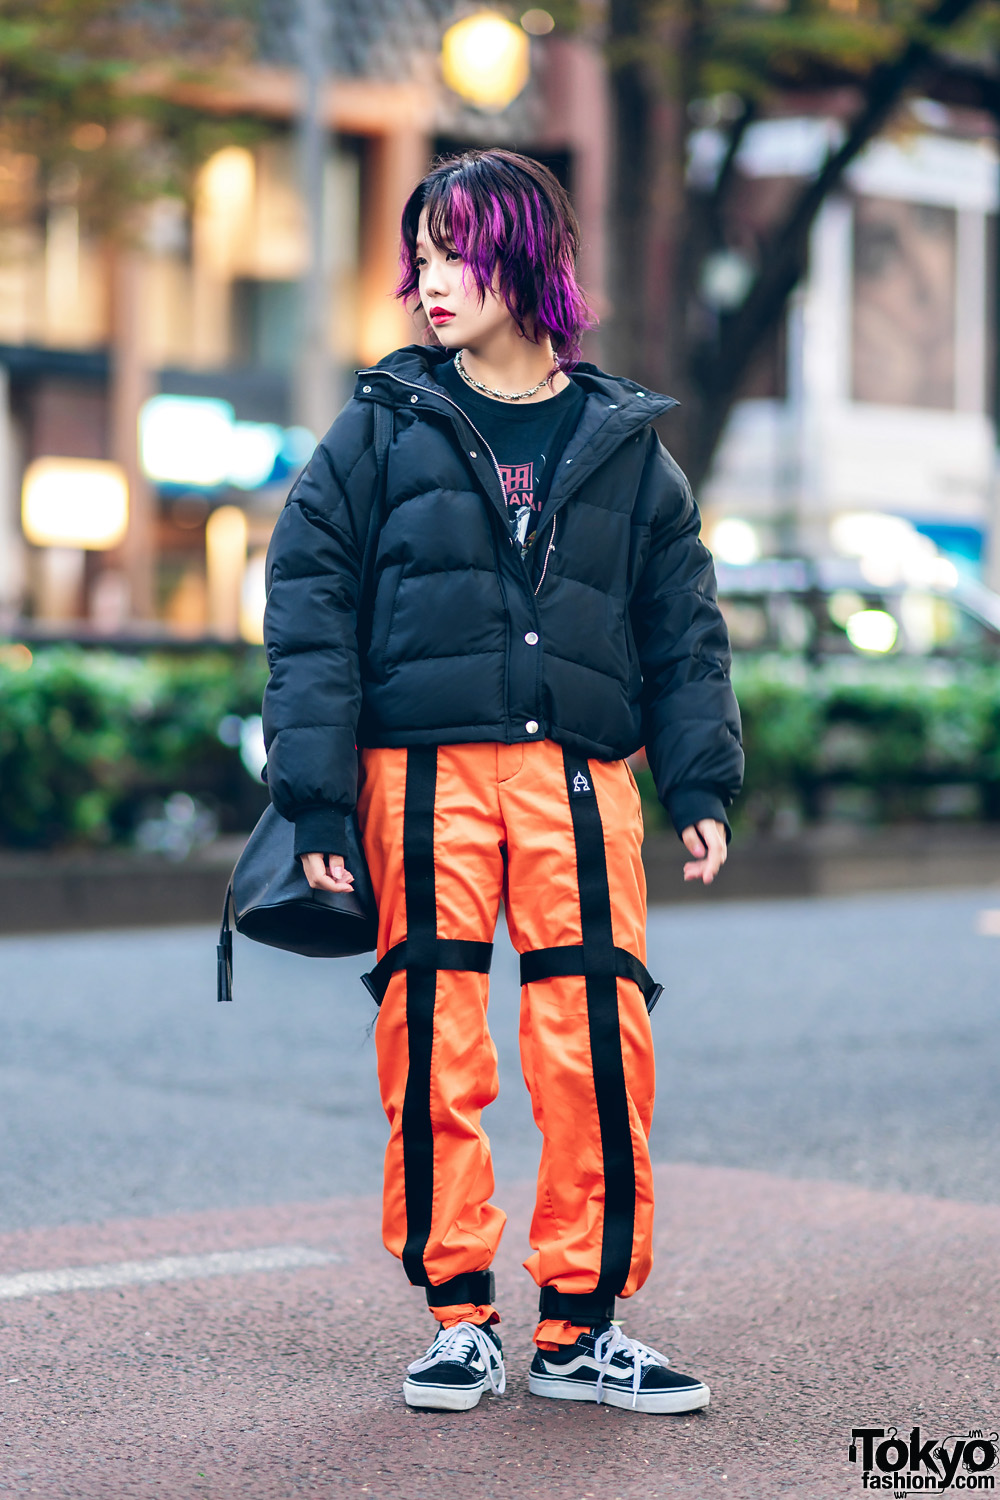 The Penny Puffer Jacket